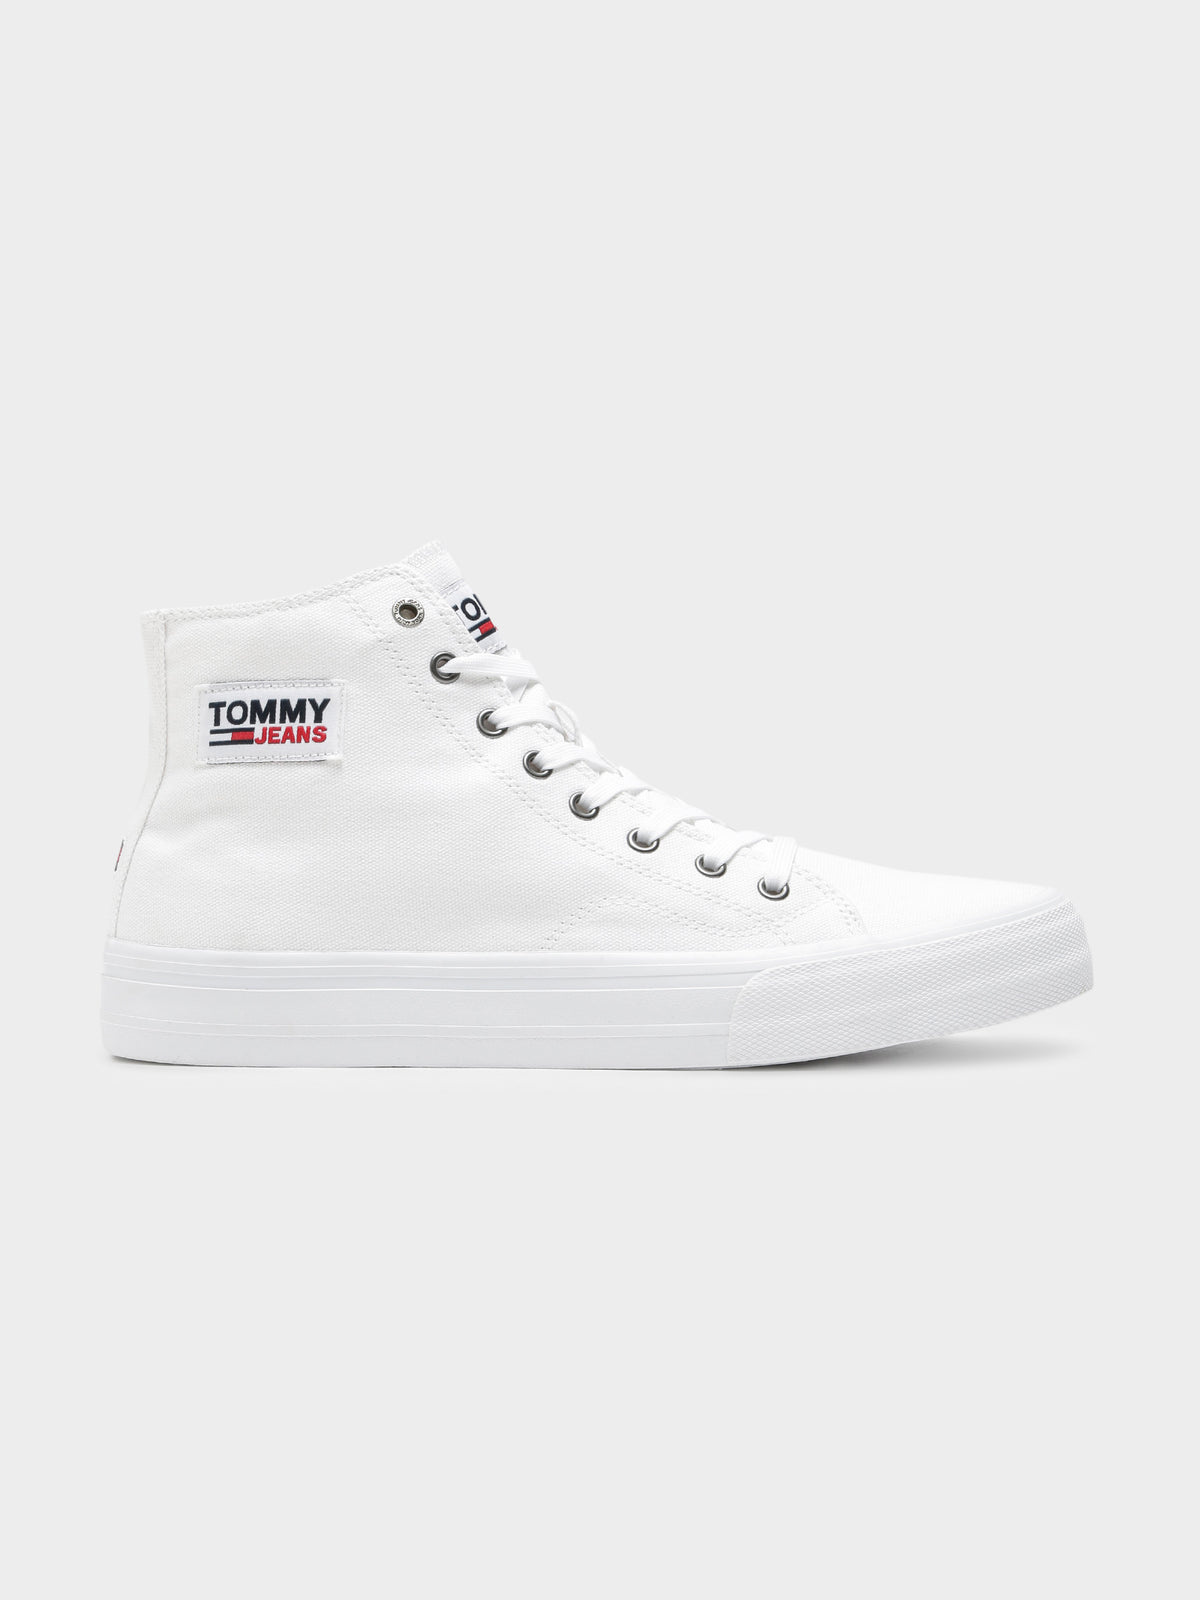 Unisex Mid Cut Lace High Top Sneaker in White